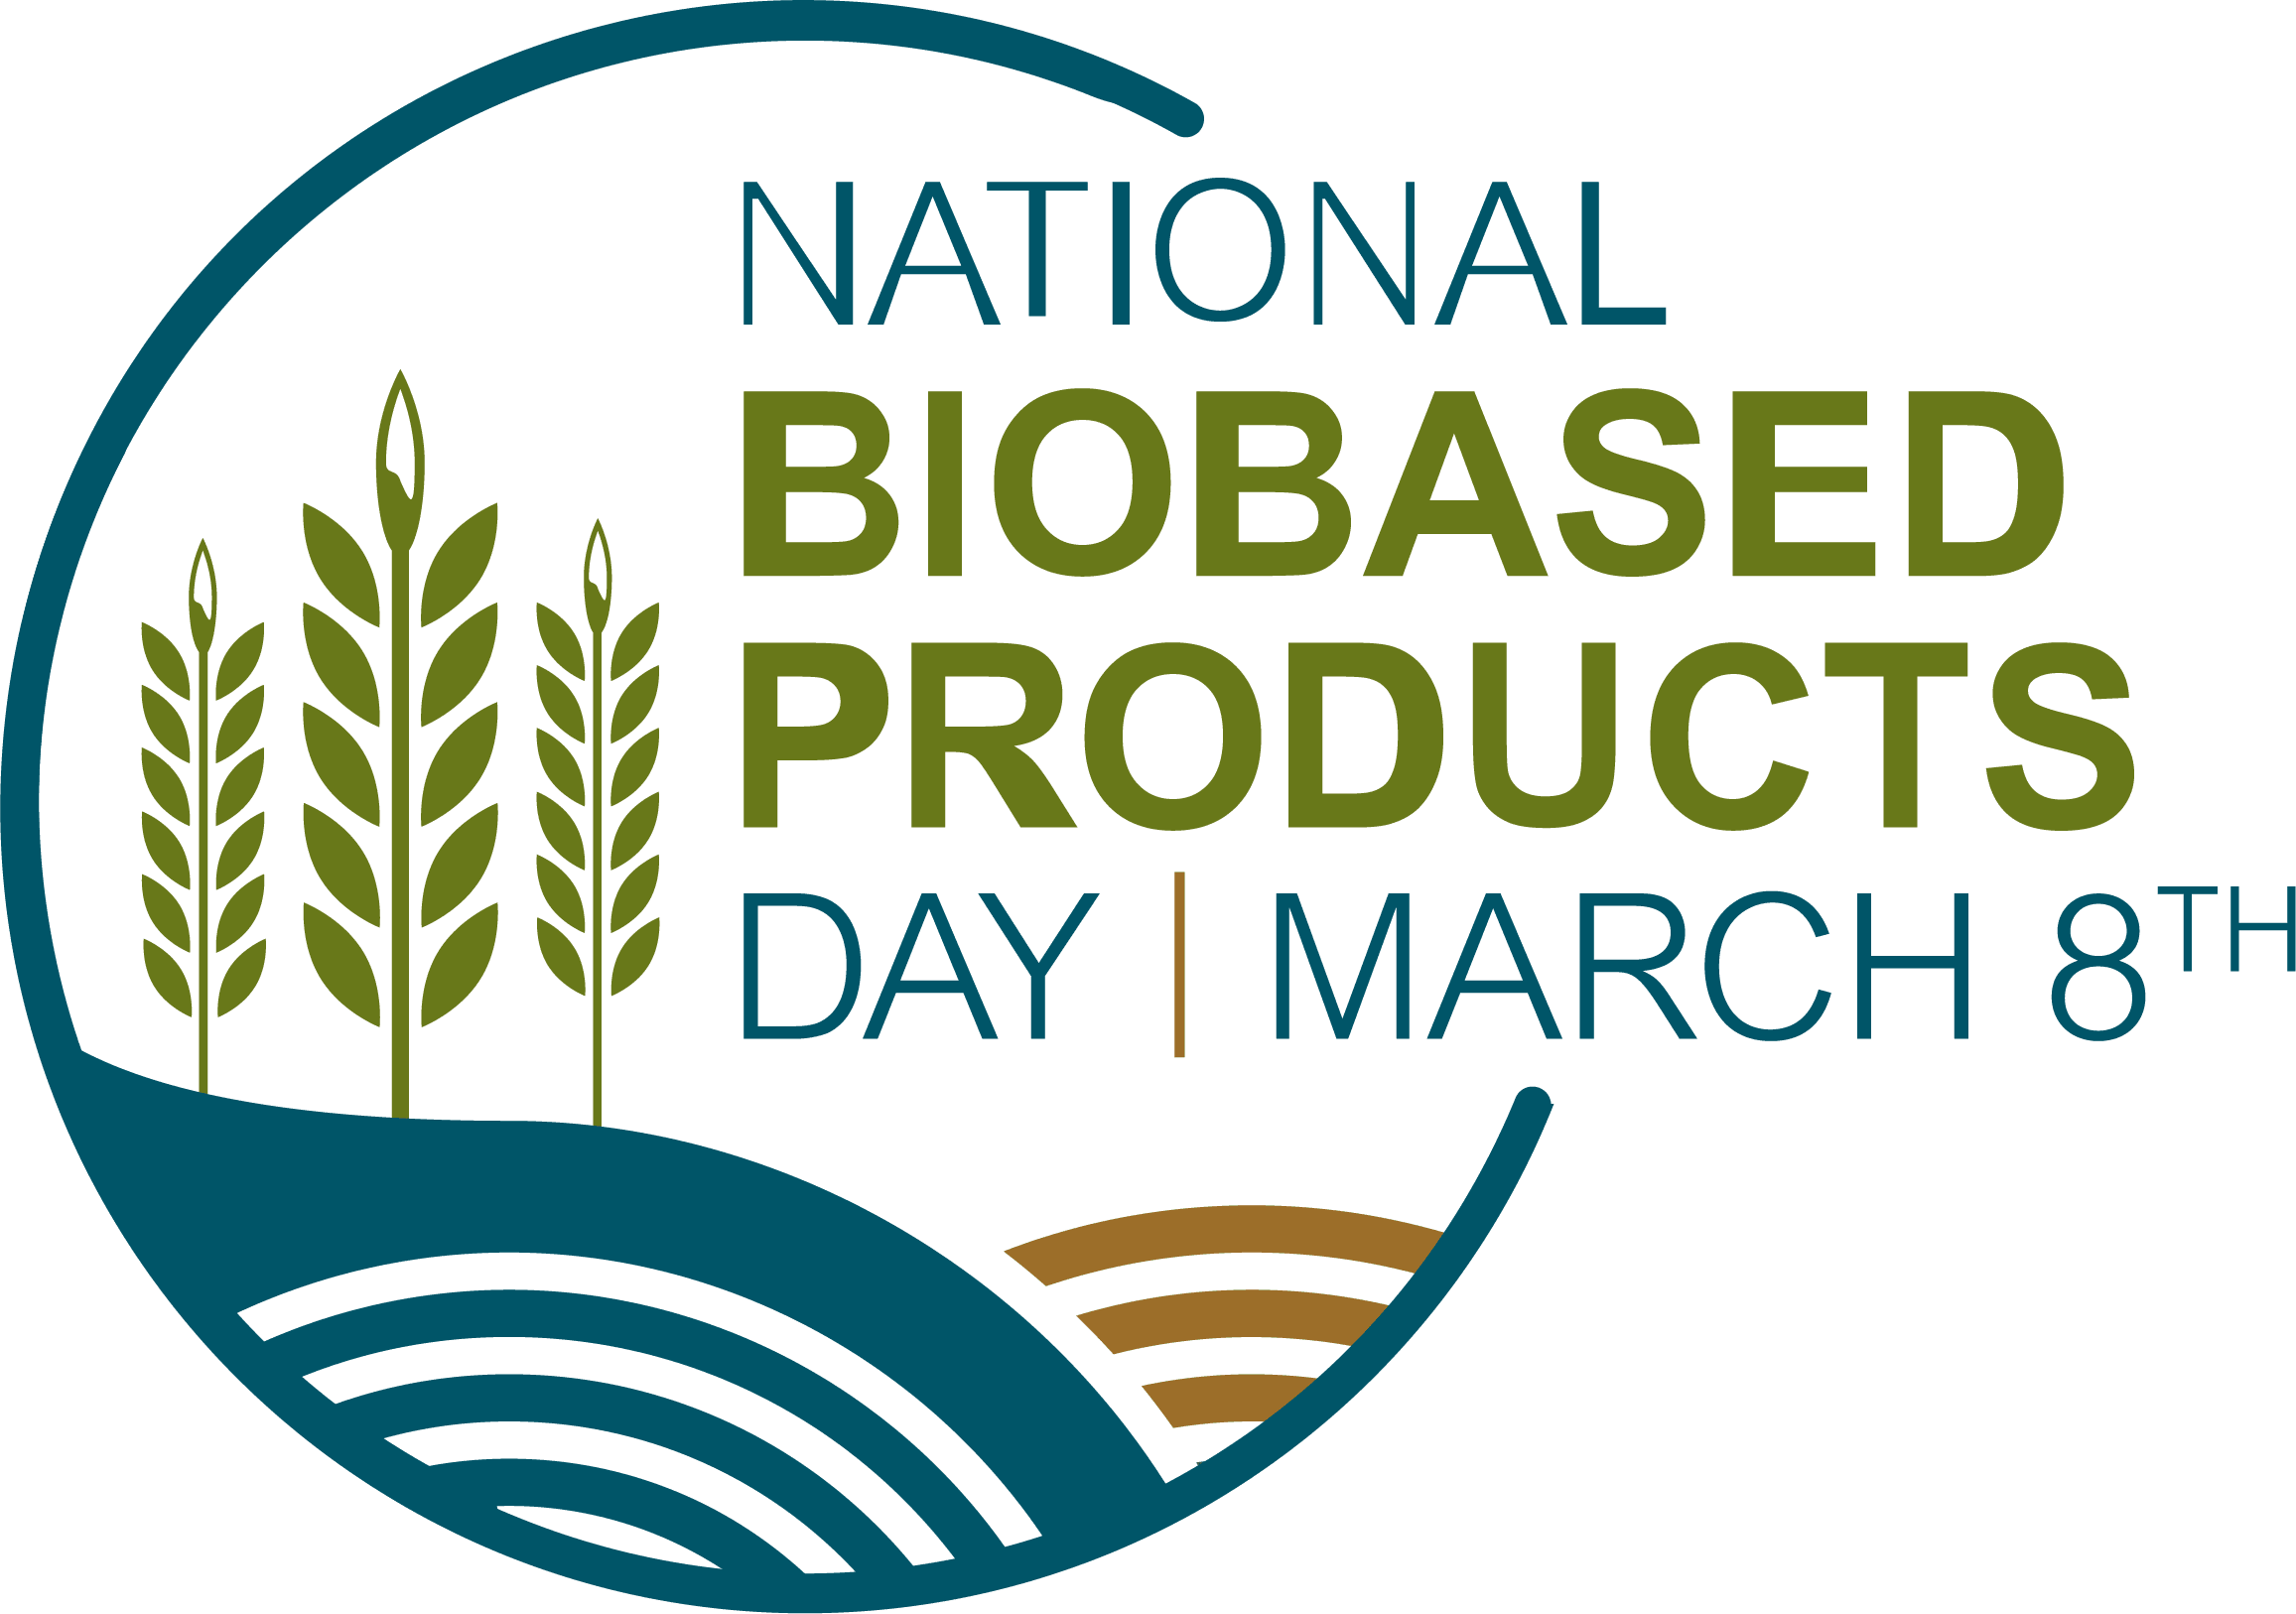 USDA BIOBASED PRODUCTS DAY